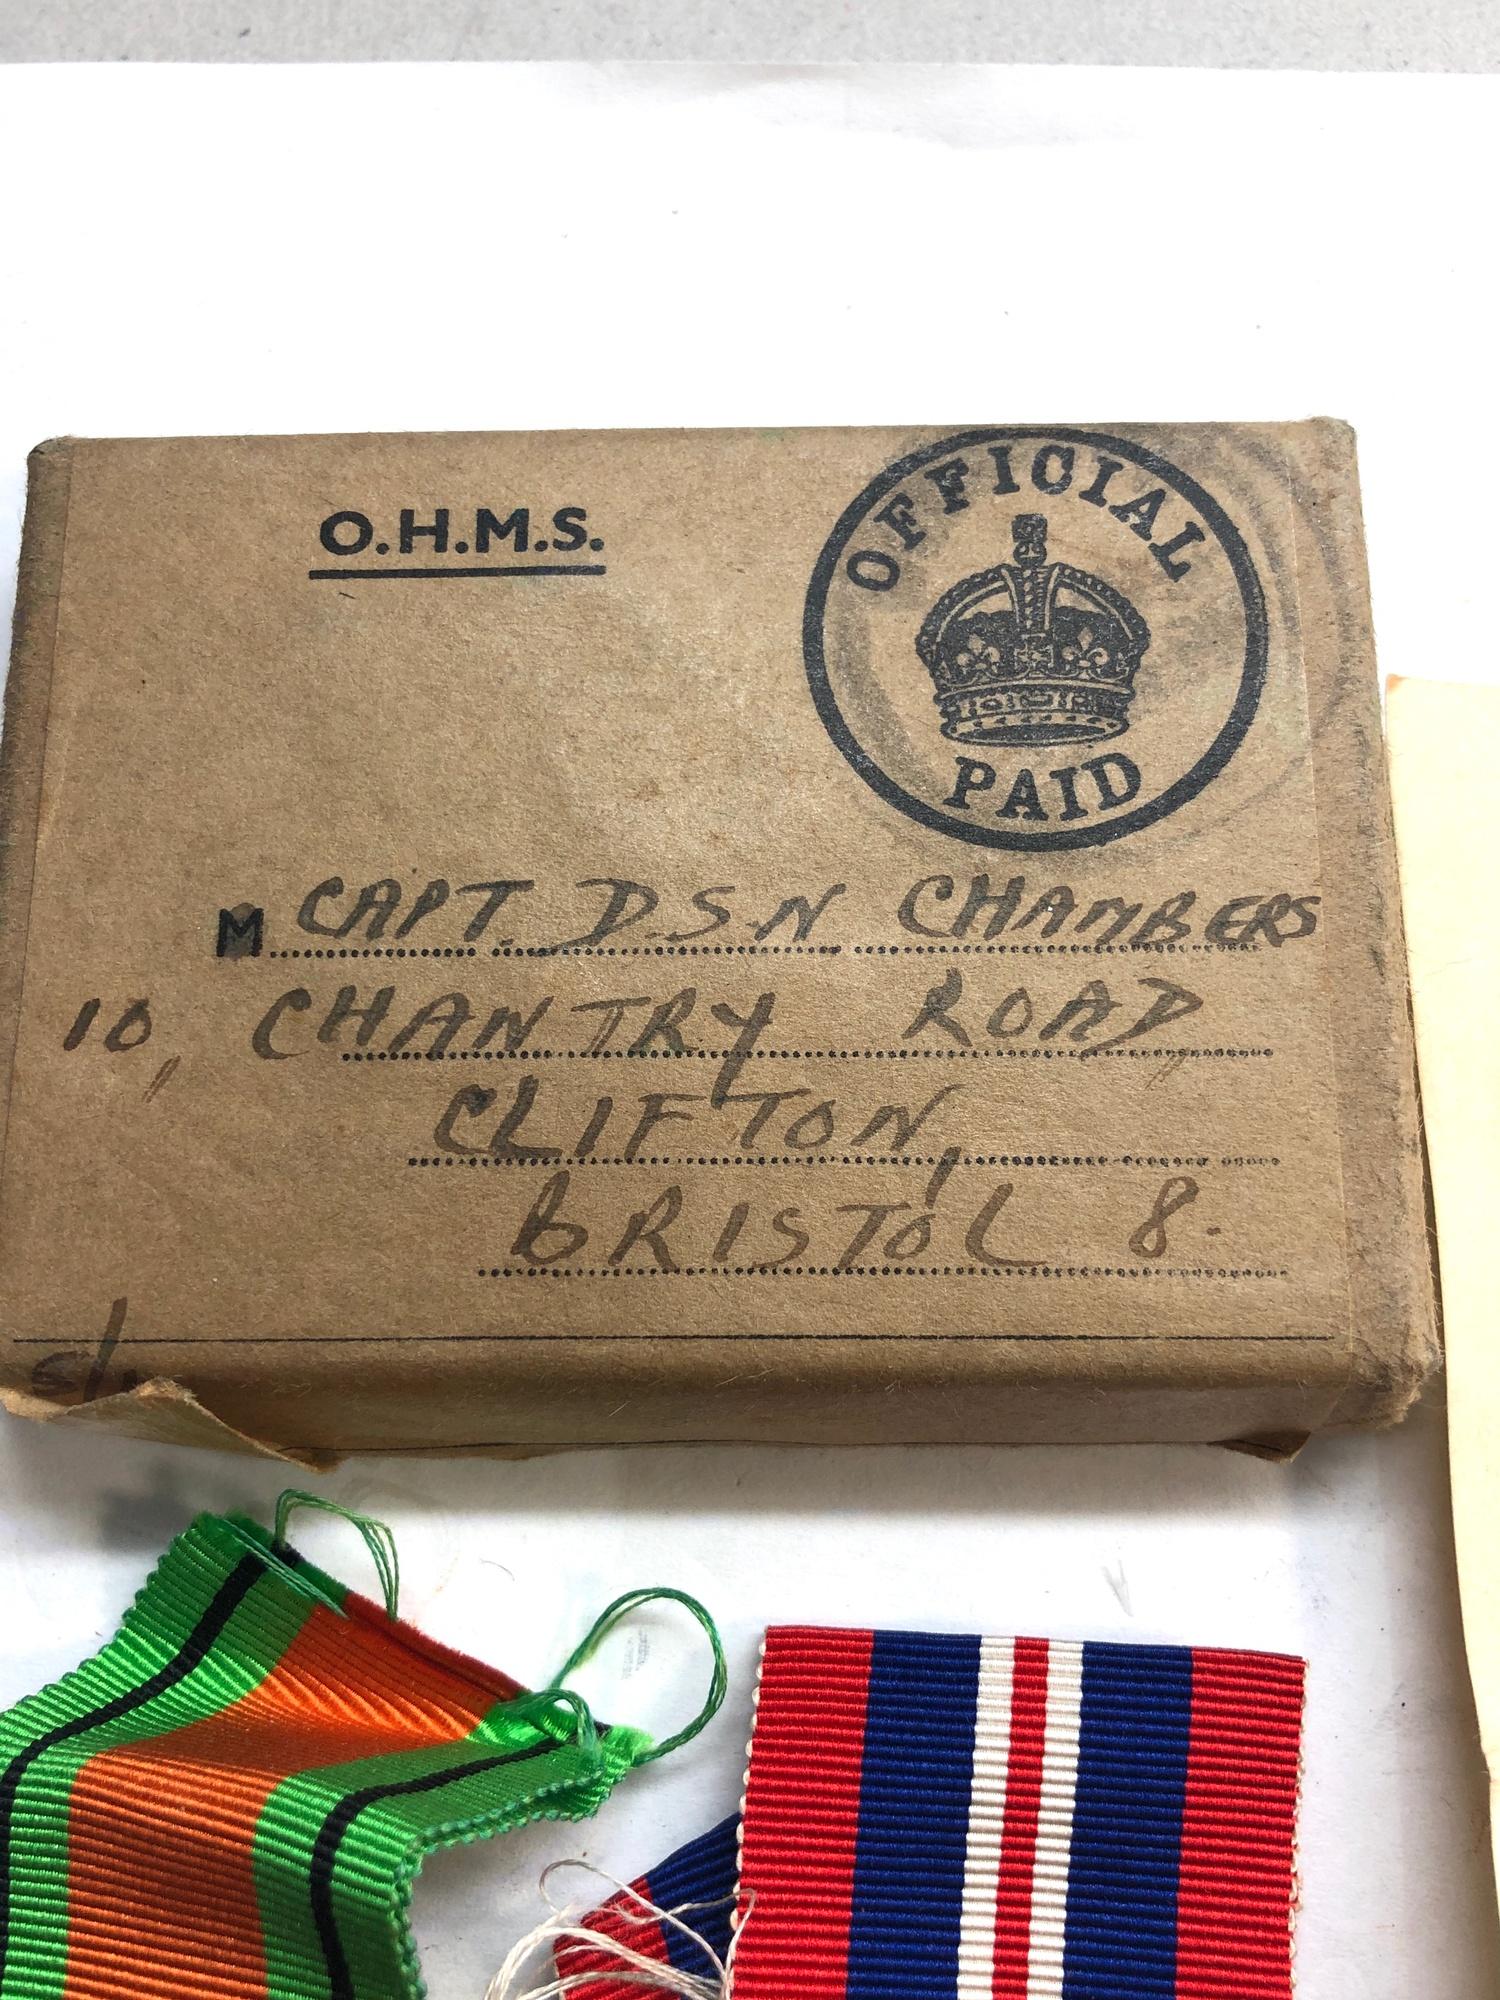 WW2 medals boxed to Capt D.S.N Chambers - Image 2 of 2